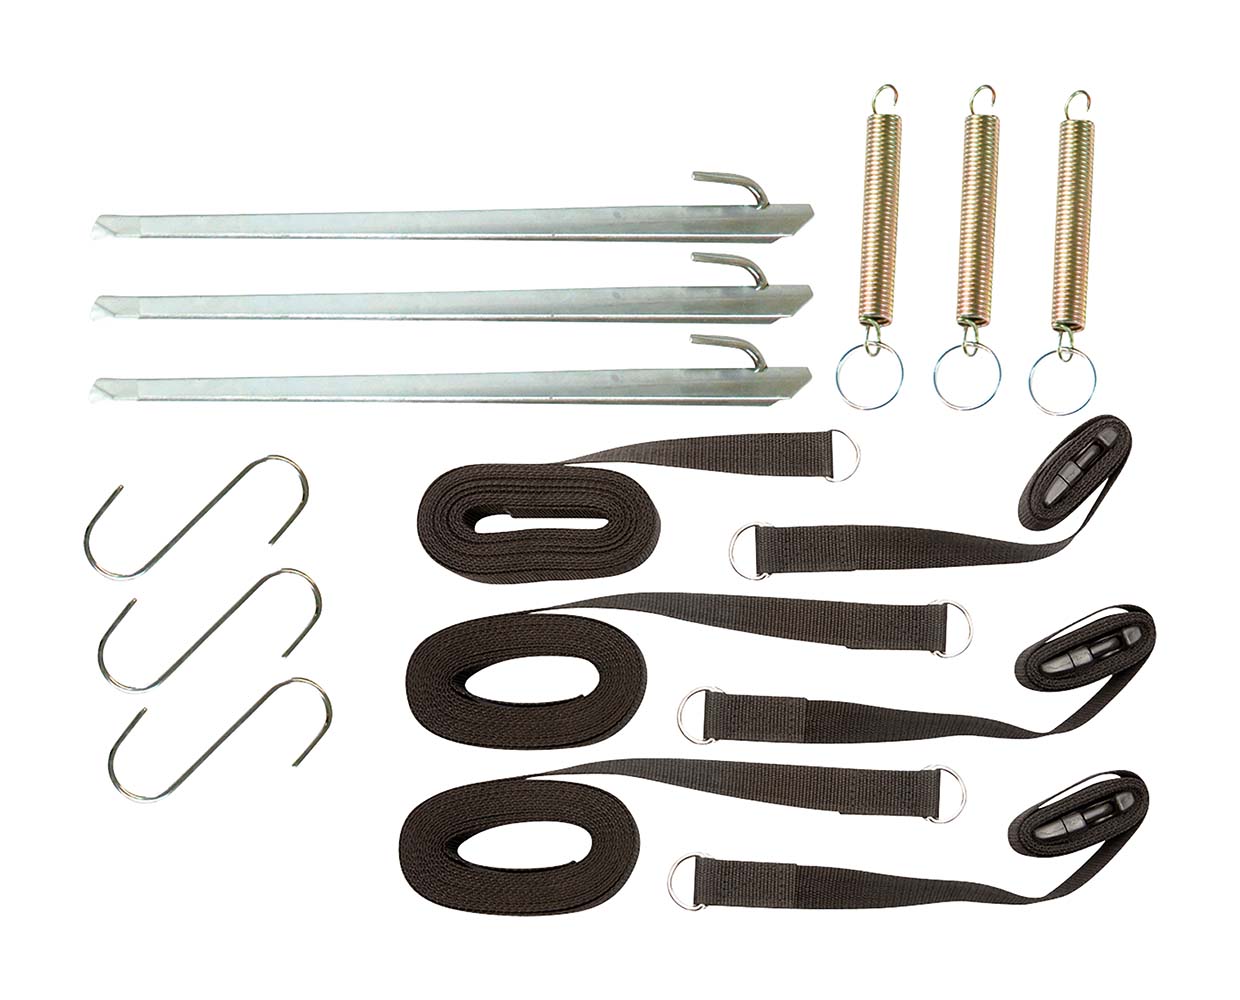 4163764 A complete storm line set. These storm straps are universally usable. Can be fixed to the top of a tent pole or to a tent pole or tent clip by means of the s hooks. Set consisting of 3x storm straps (each consisting of 2 parts), 3x storm pegs, 3x springs and 3x s-hooks. The 2 parts of a storm strap are easy to connect and then tighten due to the buckle.